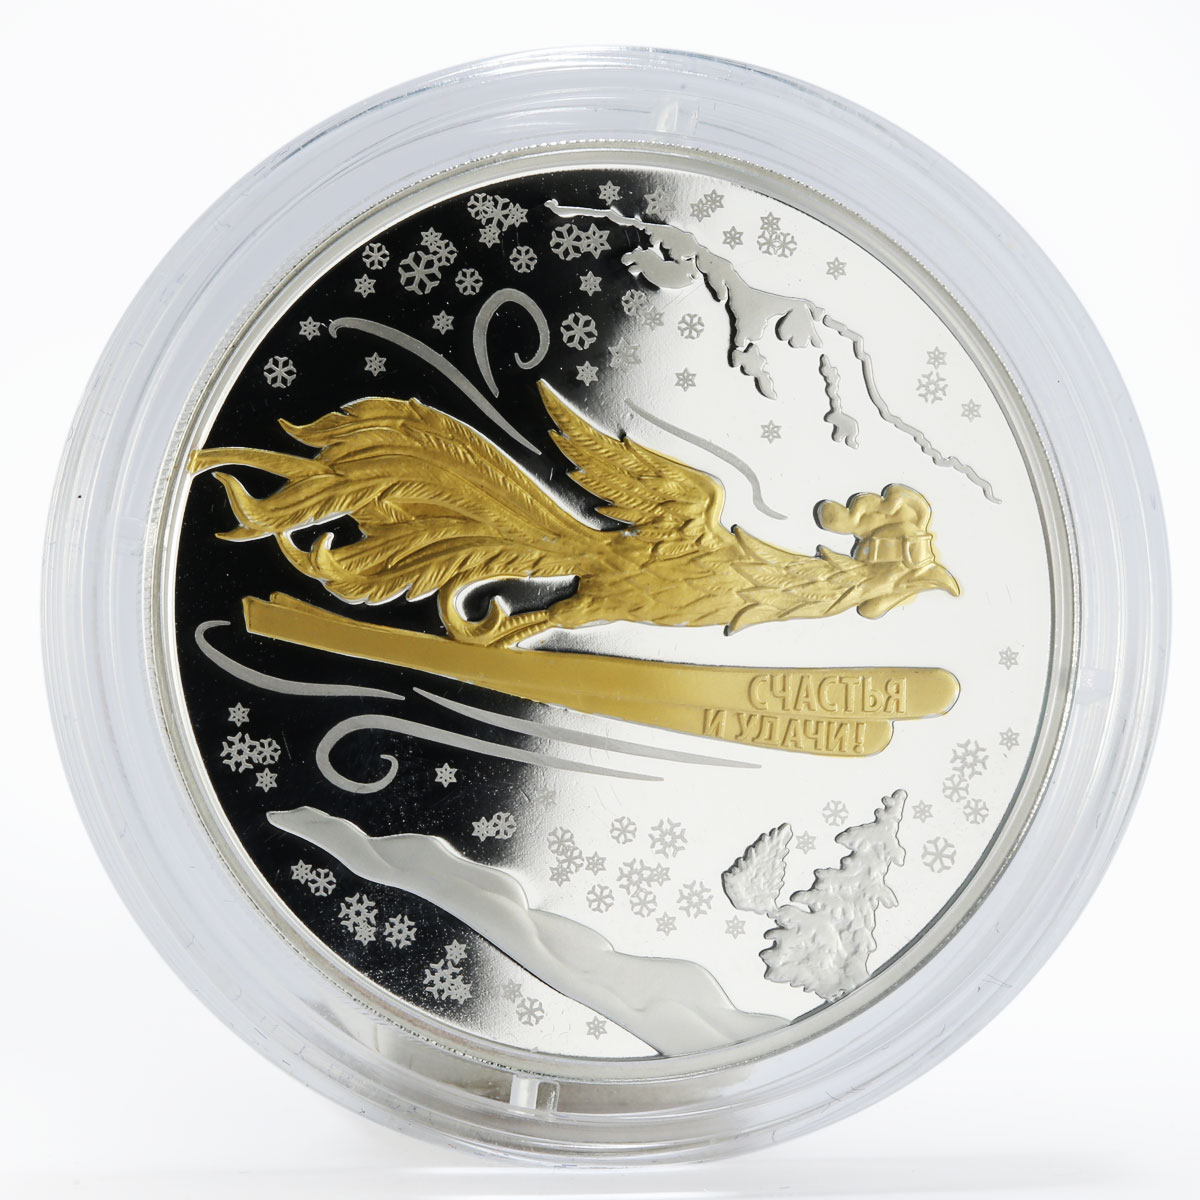 Laos 50000 kip Year of the Rooster gilded proof silver coin 2017